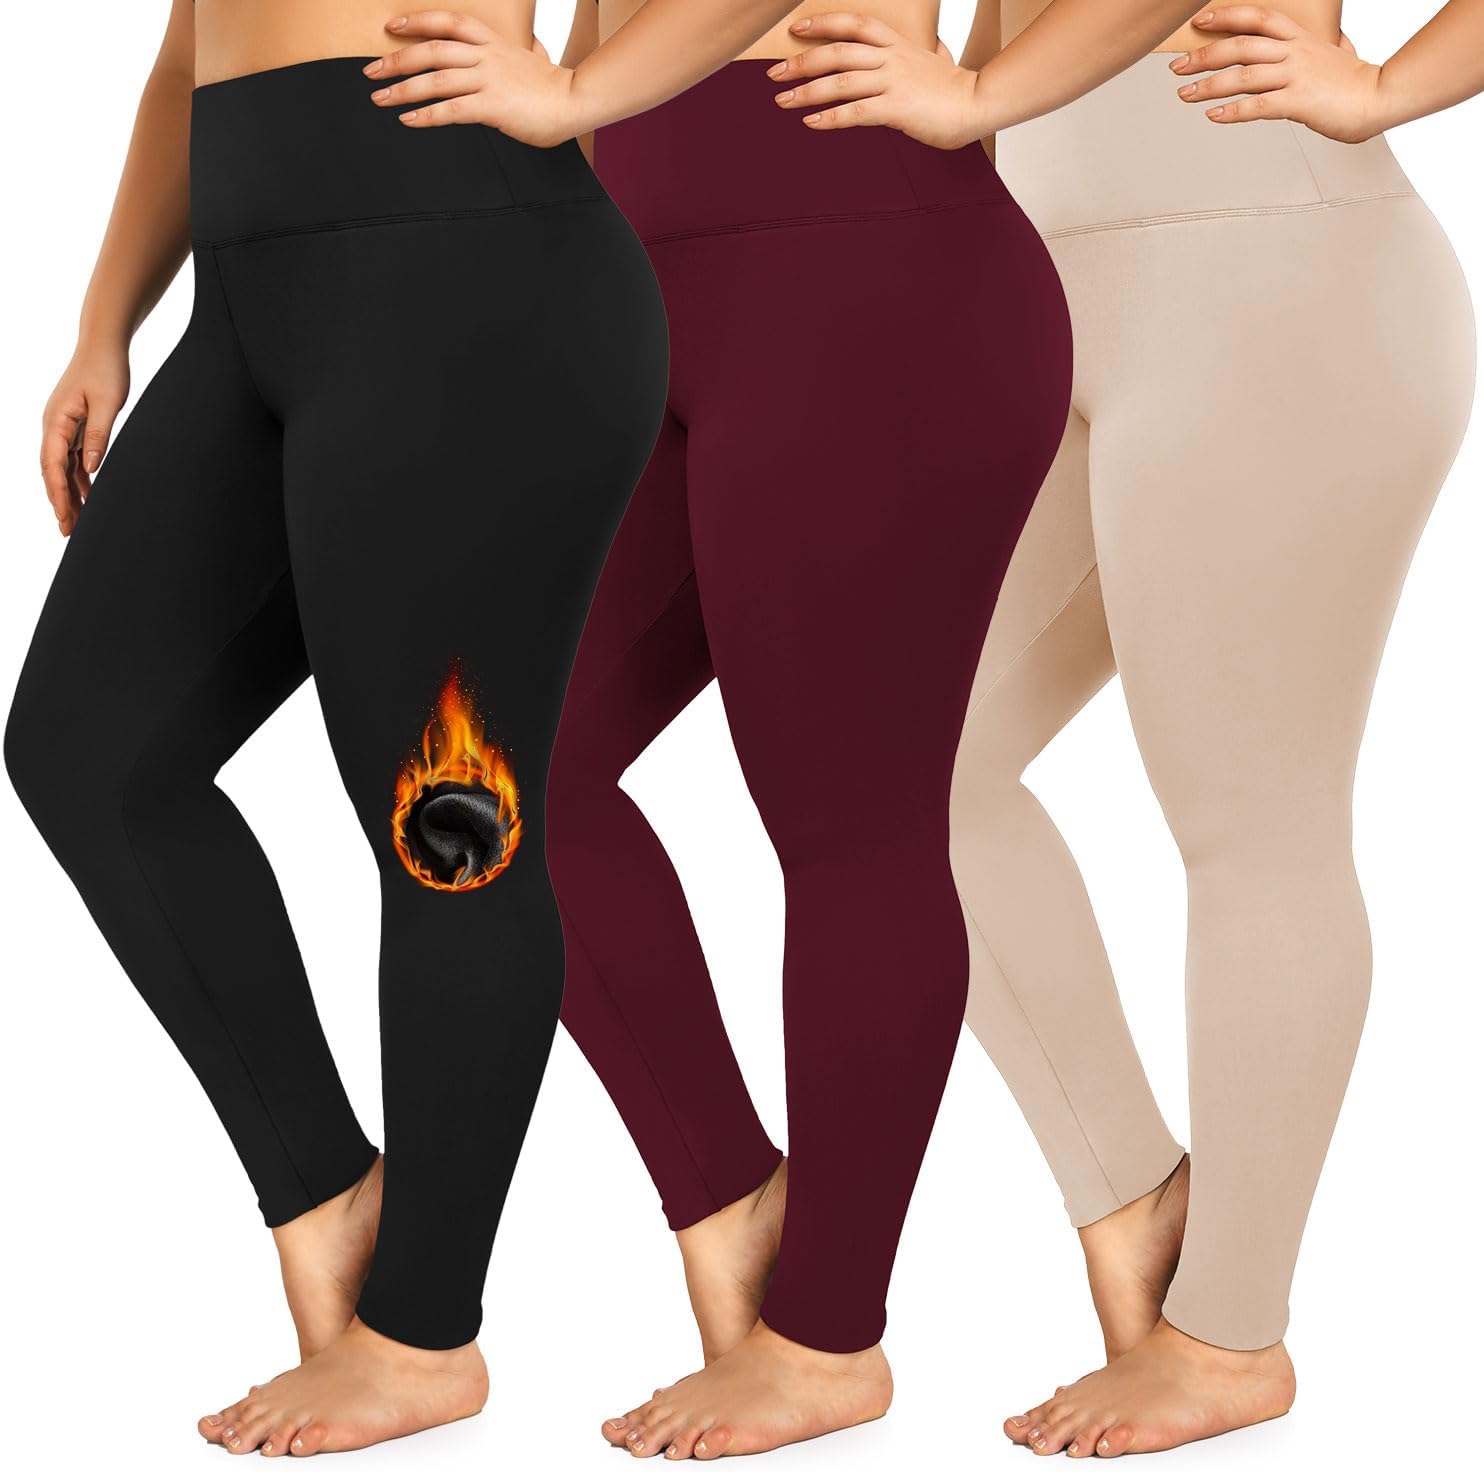 yeuG 3 Pack Womens Plus Size Fleece Lined Leggings-1X-4X High Waist Tummy Control Thermal Warm Winter Workout Yoga Pants